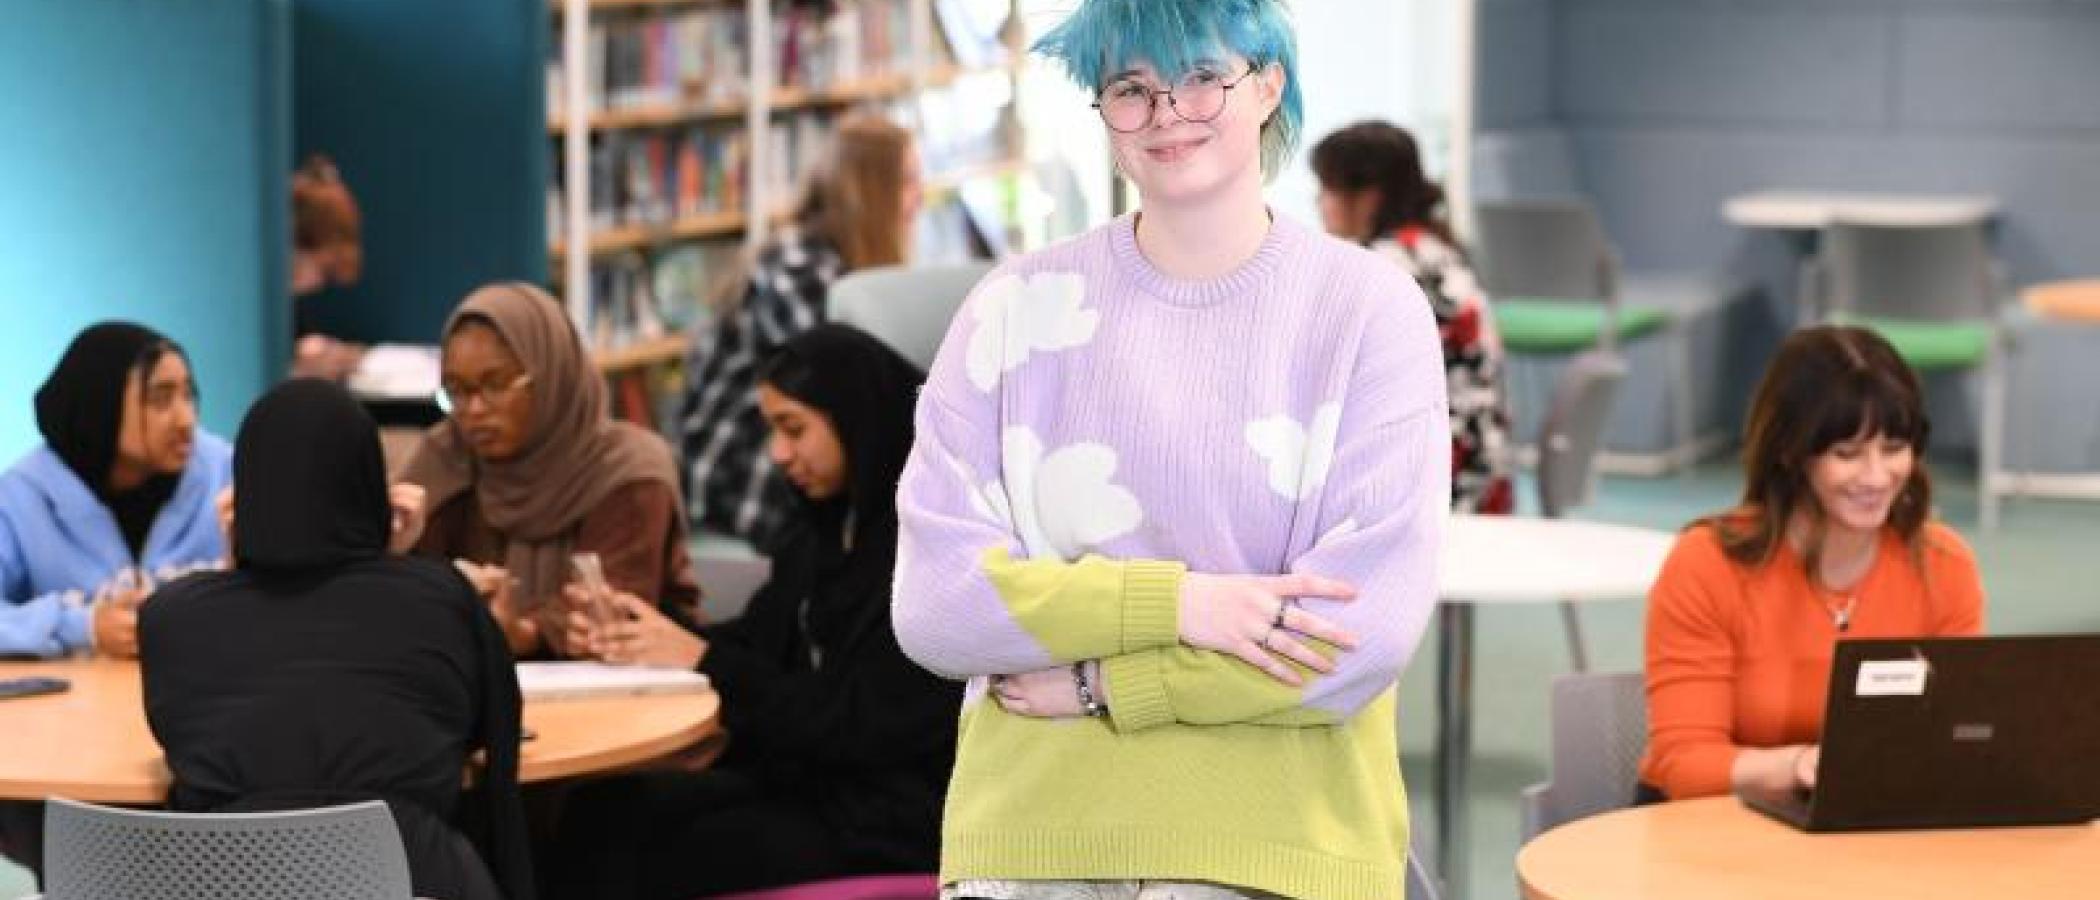 A student with blue hair and crossed arms standing and smiling at the camera, with students working and chatting on tables in the background